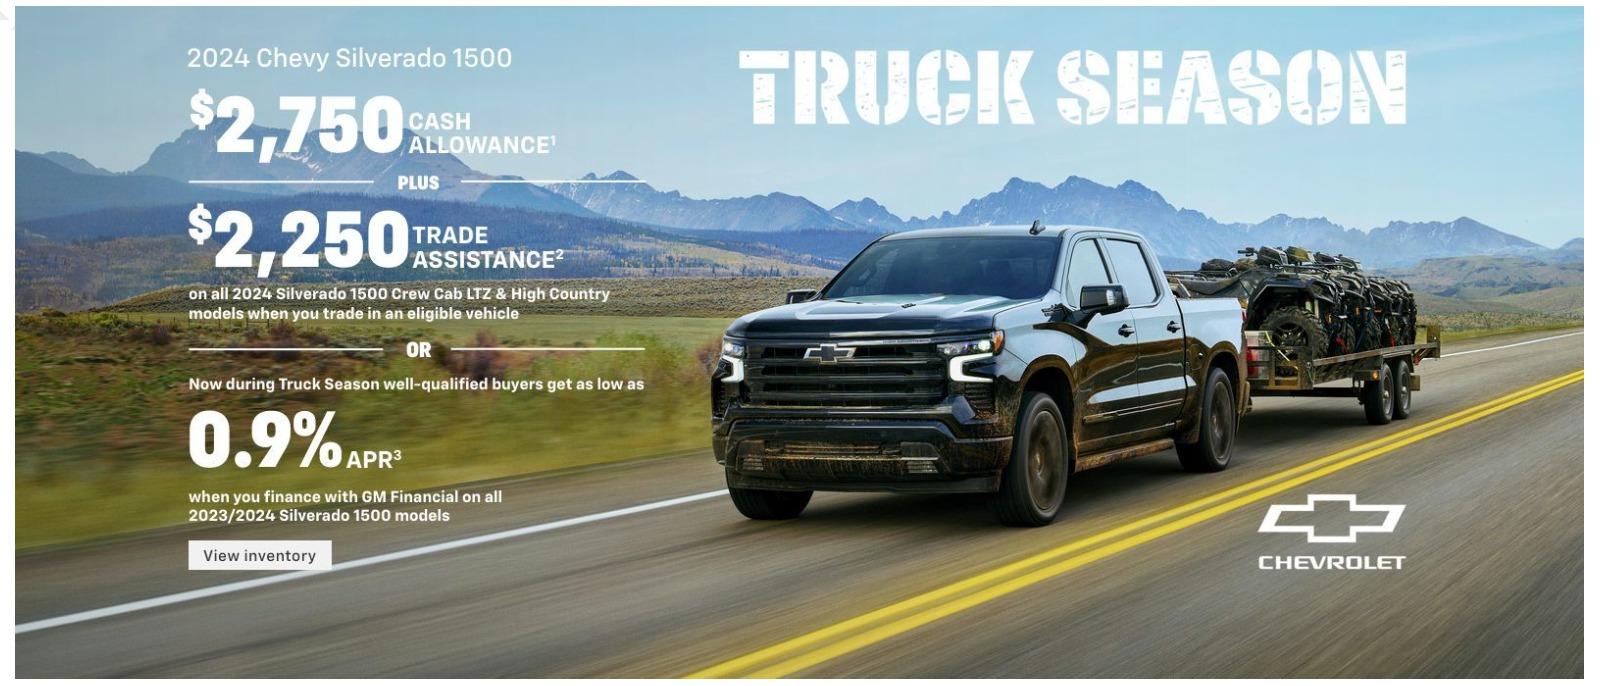 New Chevy Silverado $2,750 cash allowance. Plus, $2,250 trade assistance on all 2024 Silverado 1500 Crew Cab LTZ & High Country models when you trade in an eligible vehicle. Or, now during Truck Season well-qualified buyers get as low as 0.9% APR when you finance with GM Financial on all 2023/2024 Silverado 1500 models.